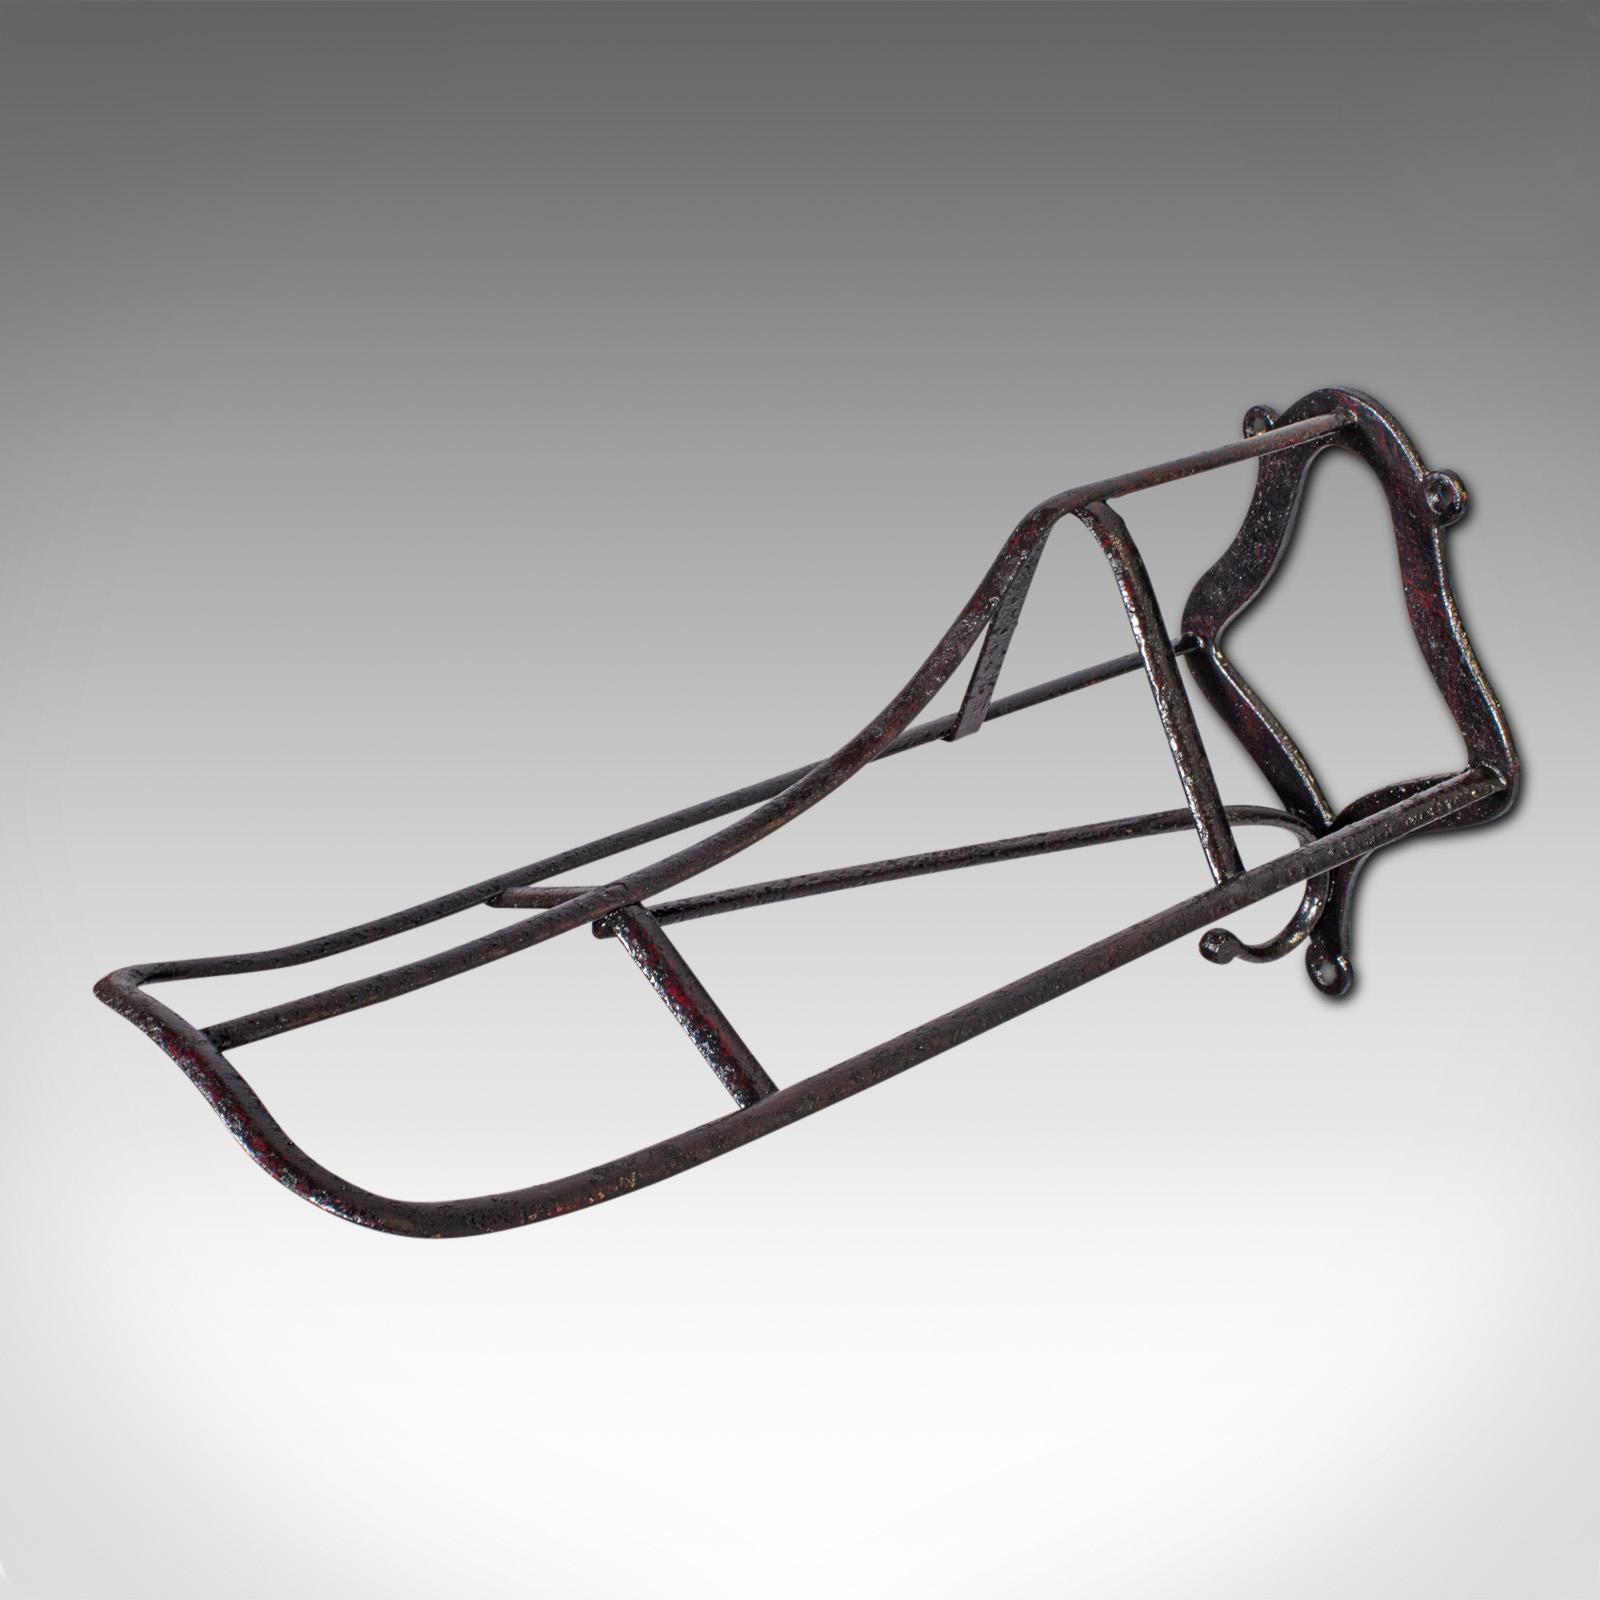 British Antique Duck Bill Saddle Rack, English Cast Iron Equestrian Tack Rest, Victorian For Sale